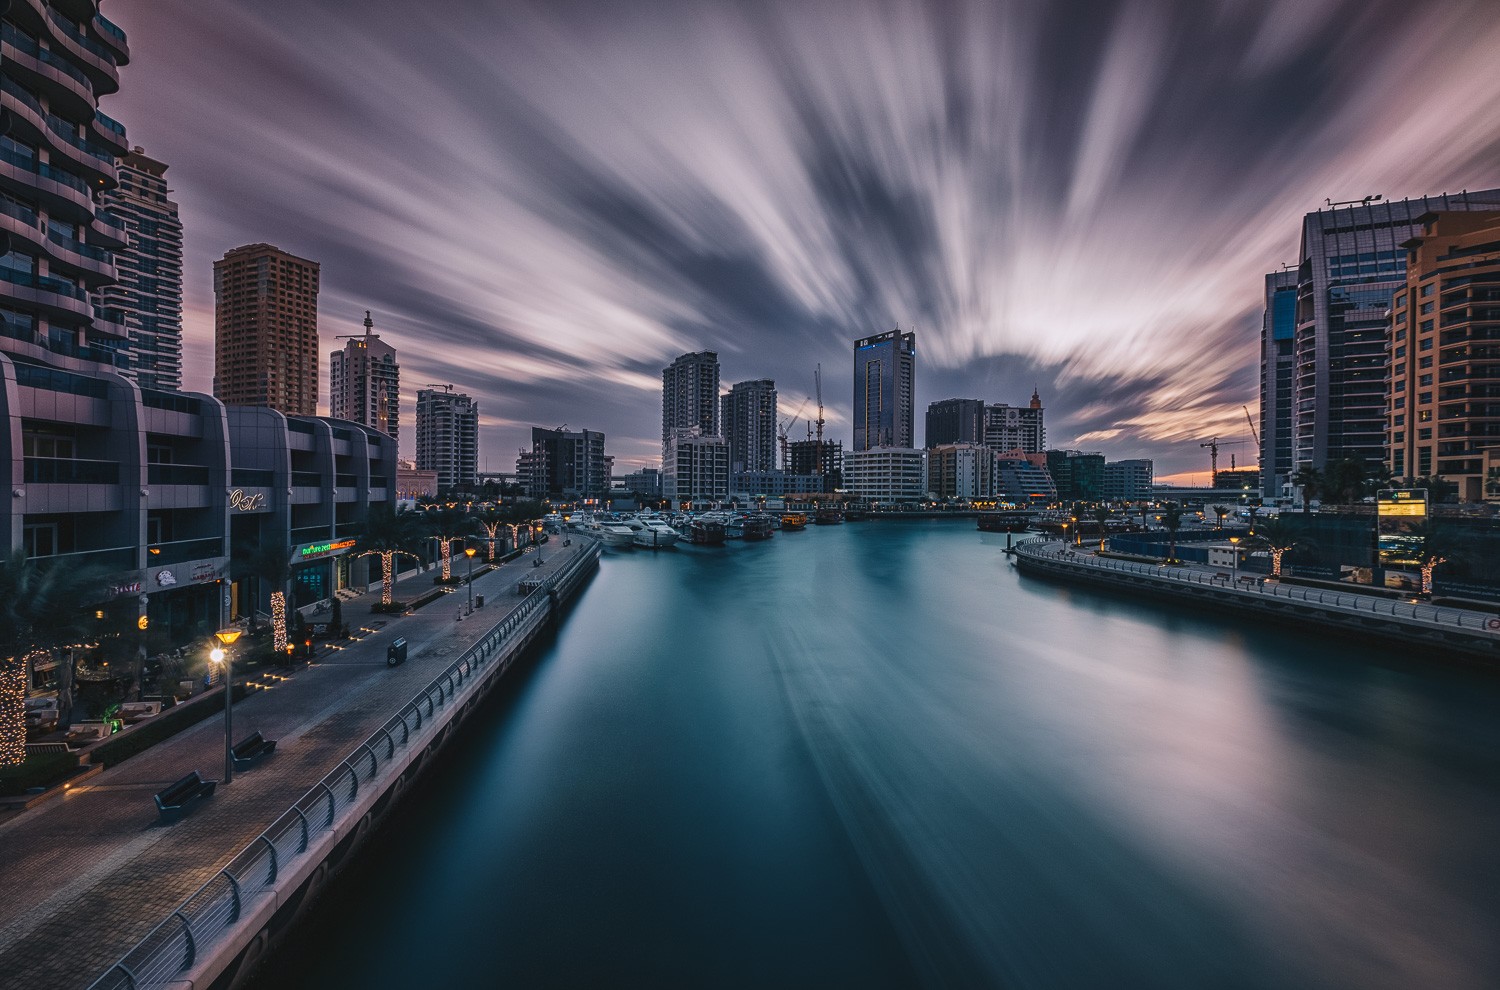 5 Reasons Why Your Long-Exposure Photos Are Just Not Sharp Enough and 8 Solutions to Fix It